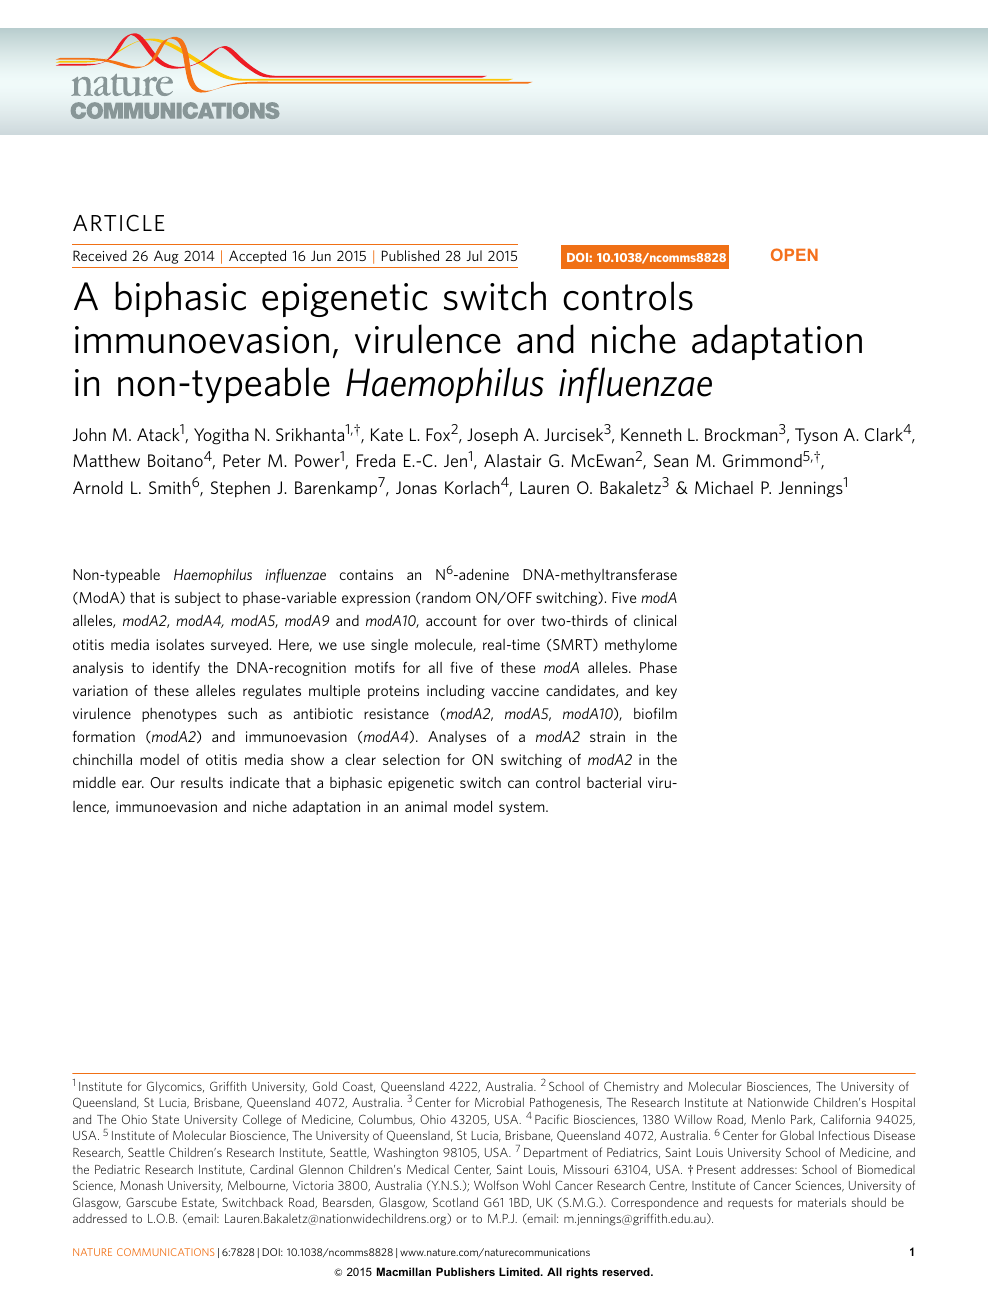 A Biphasic Epigenetic Switch Controls Immunoevasion Virulence And Niche Adaptation In Non Typeable Haemophilus Influenzae Topic Of Research Paper In Biological Sciences Download Scholarly Article Pdf And Read For Free On Cyberleninka